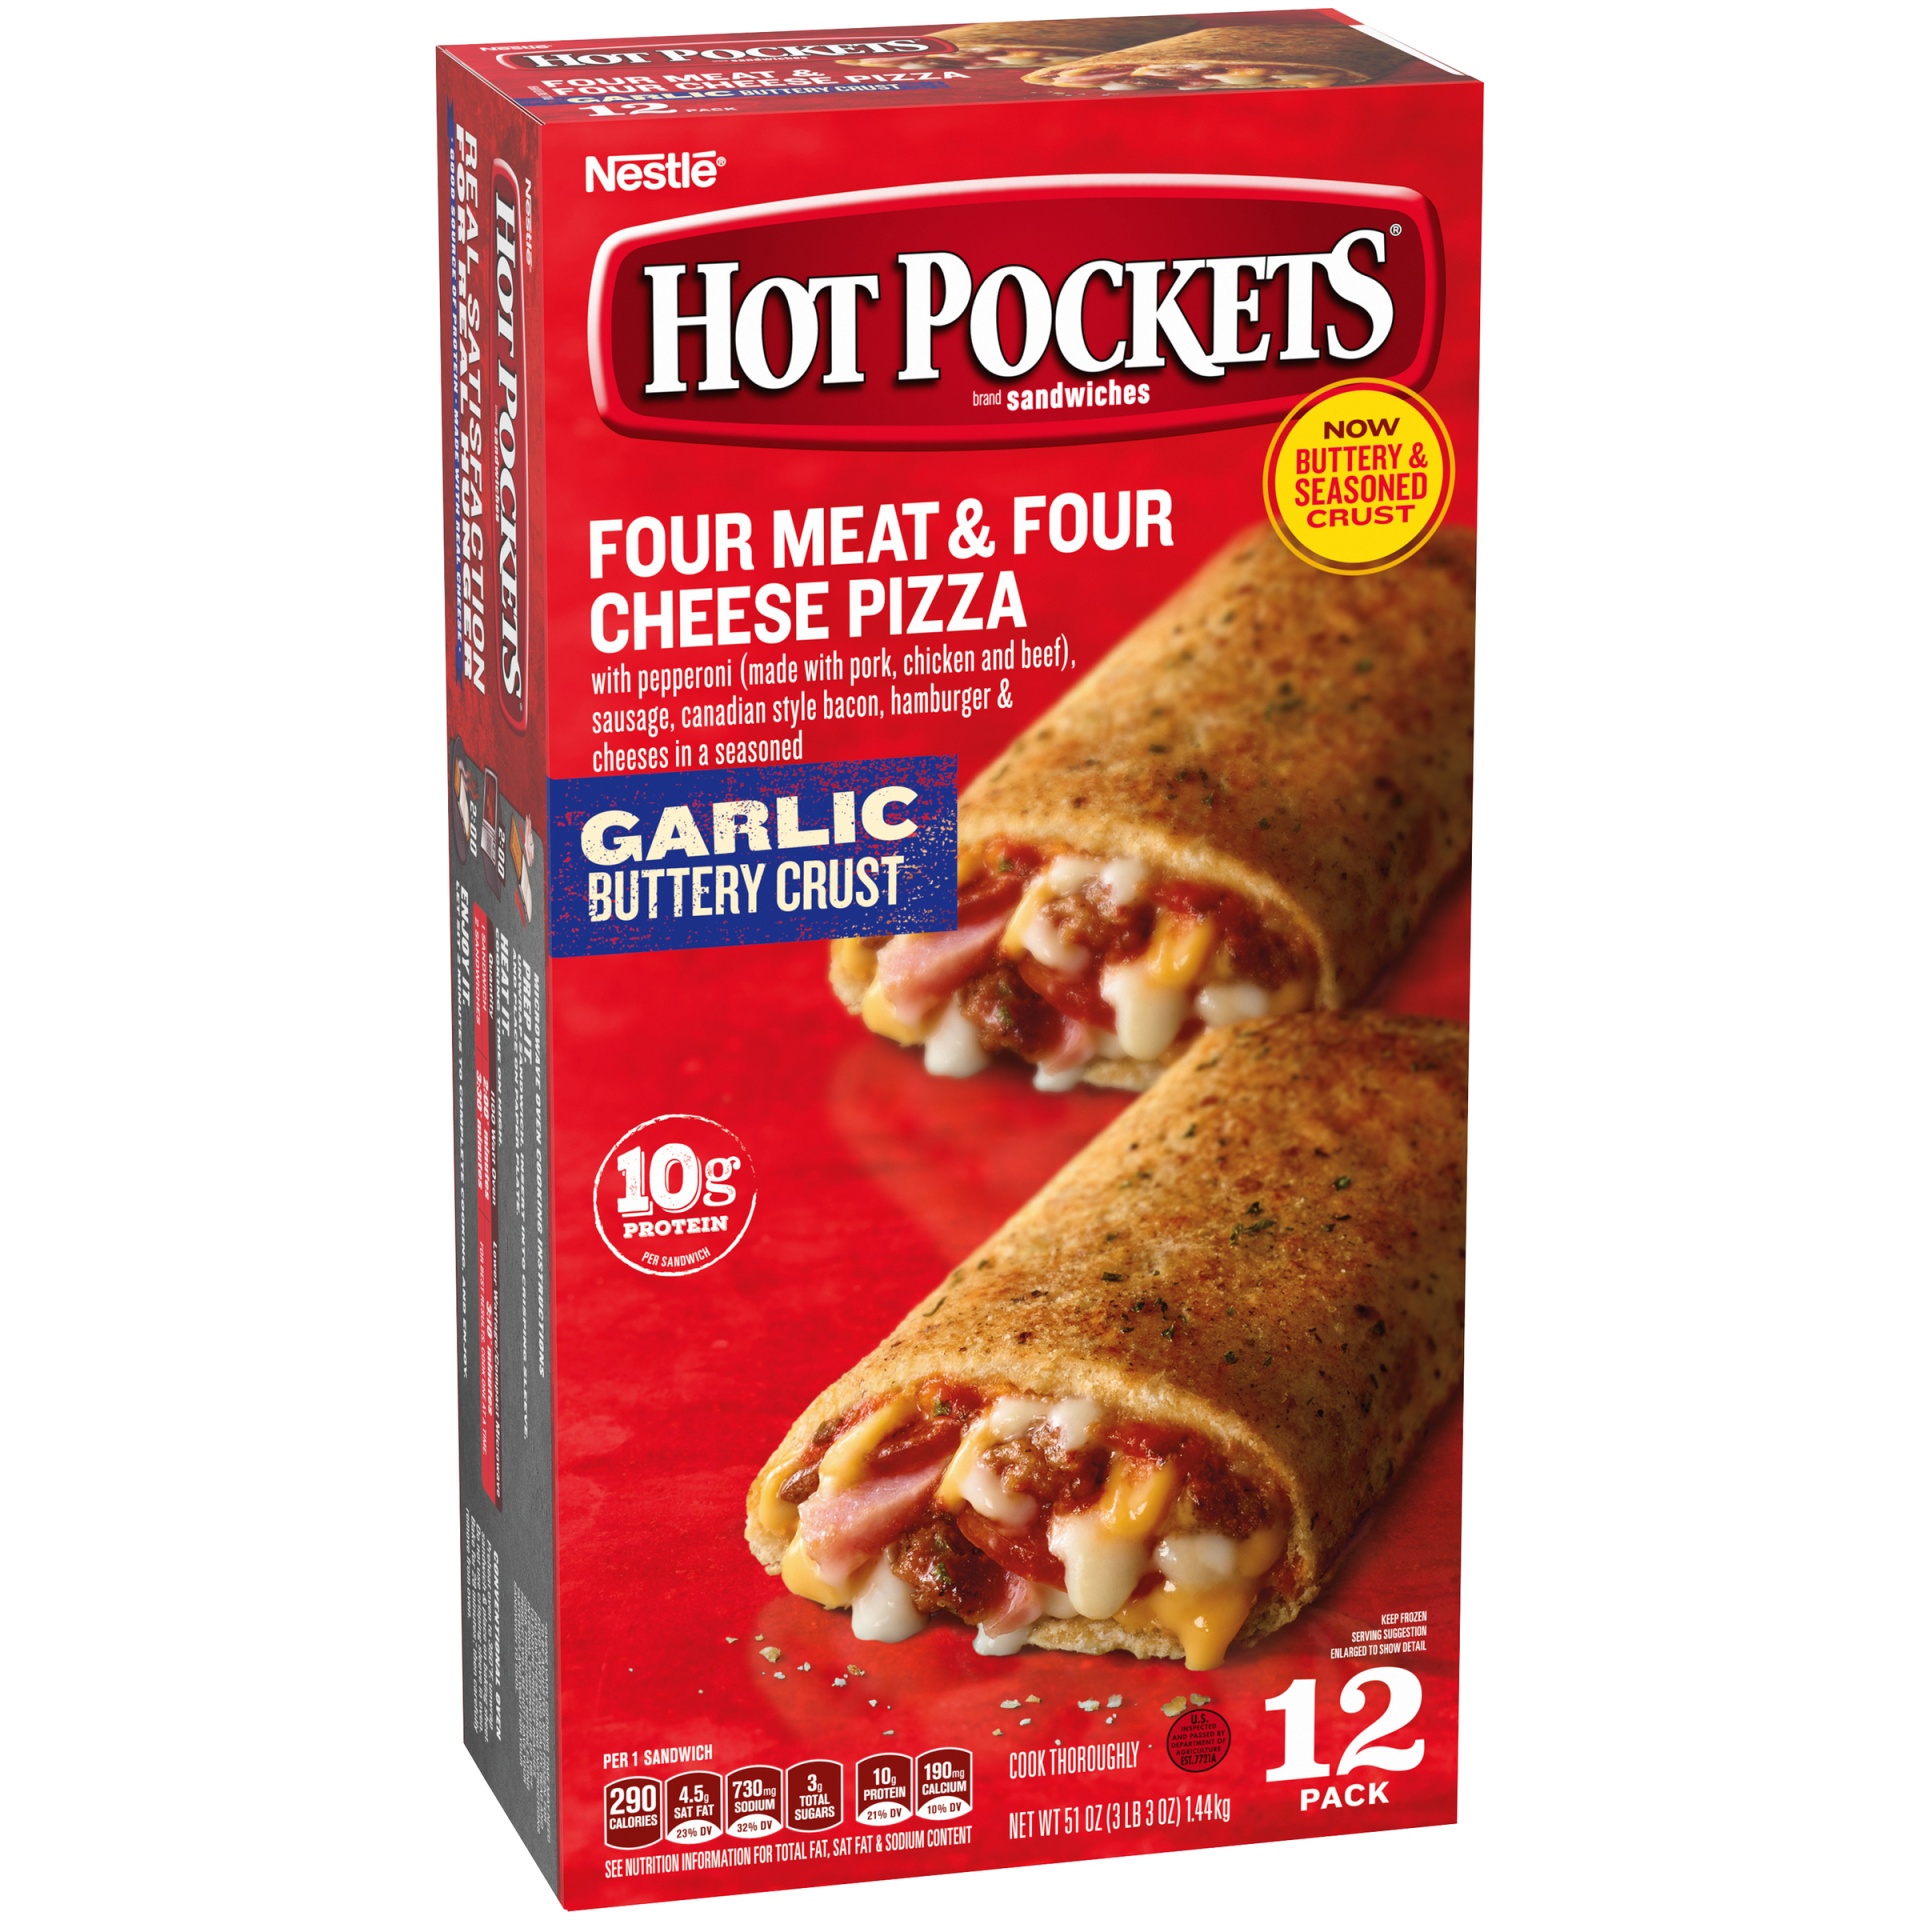 slide 3 of 6, Hot Pockets Four Meat And Four Cheese Pizza Garlic Buttery Crust Frozen Sandwiches, 12 ct; 4.5 oz